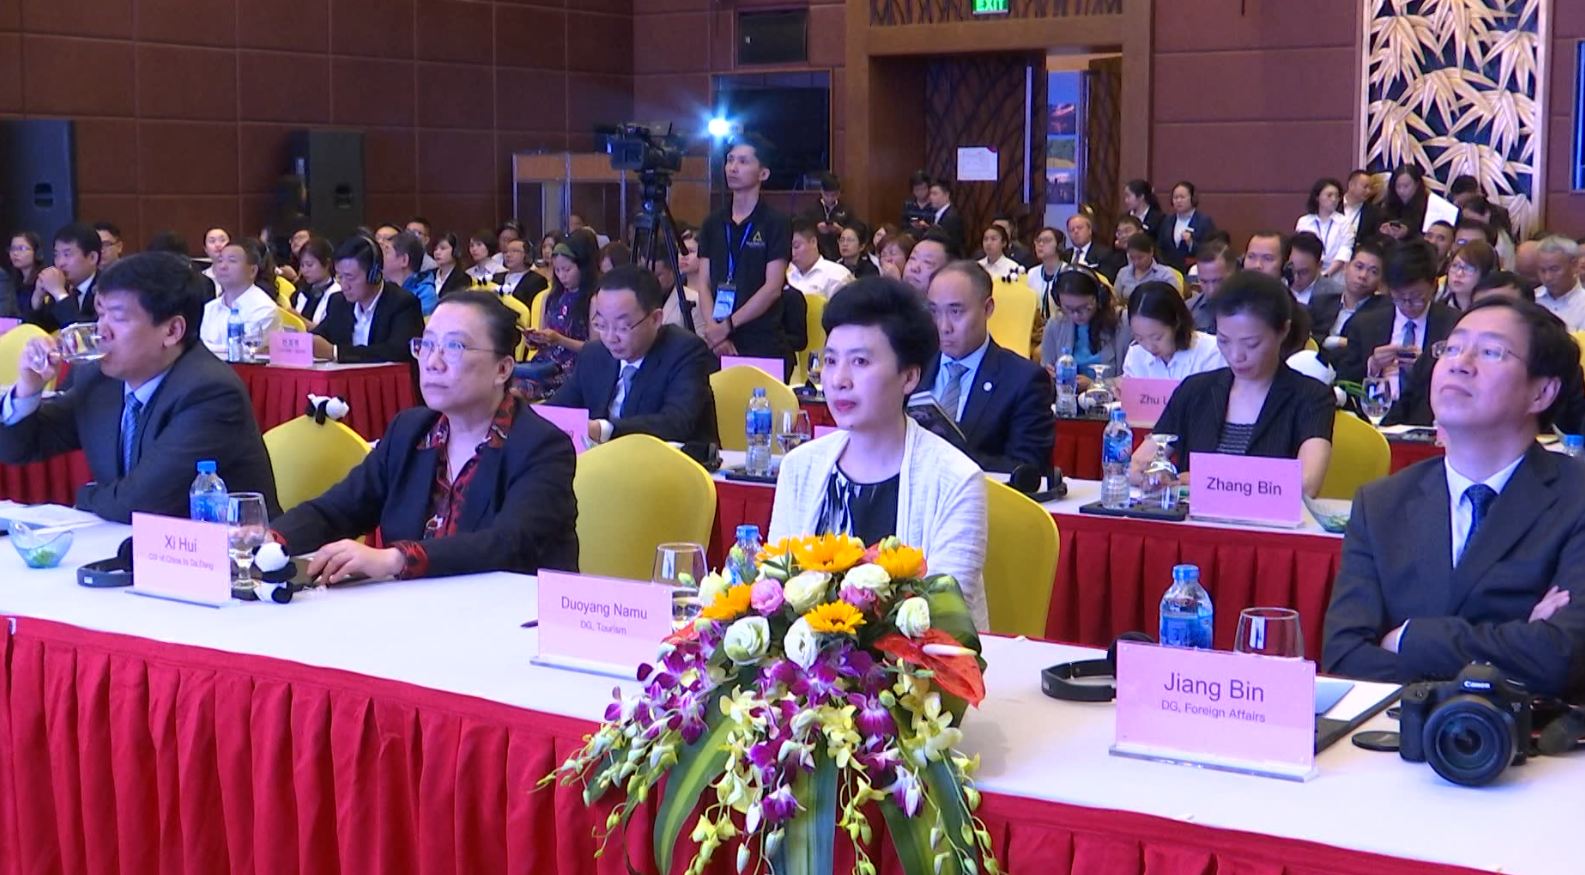 Participants at the conference (Photo: http://www.drt.danang.vn)